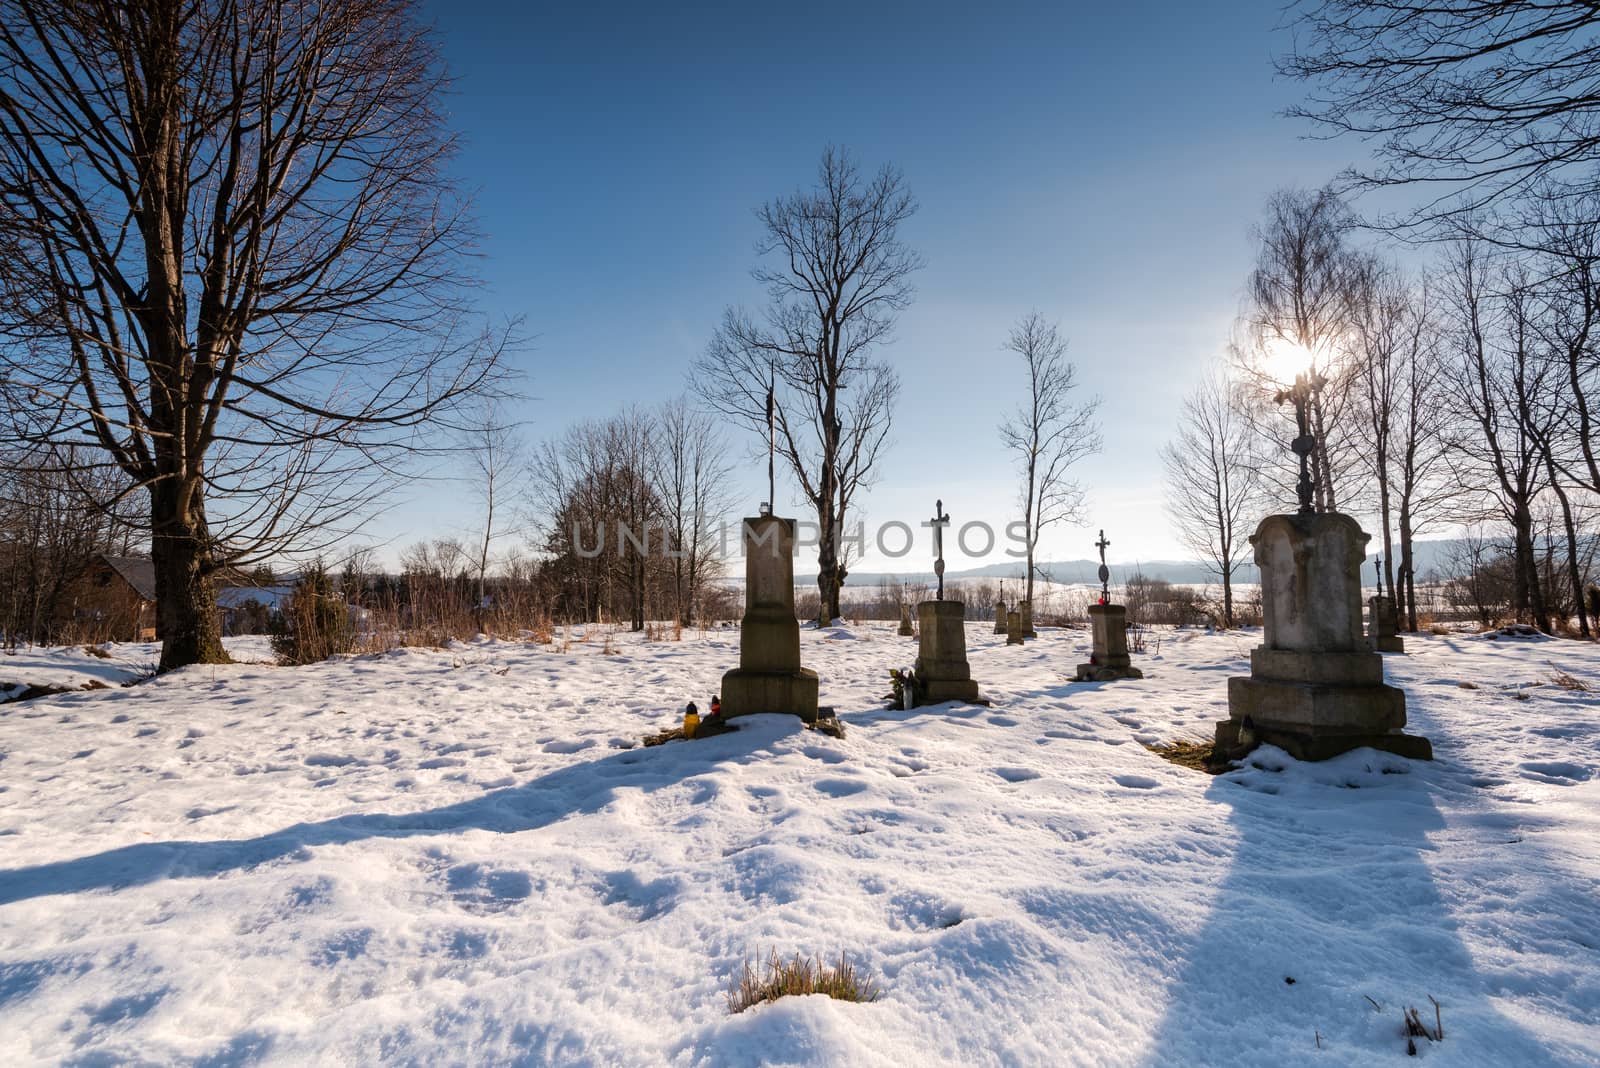 Small Cemetary in Bieszczady Village Bystre at Winter Time Covered in Snow.